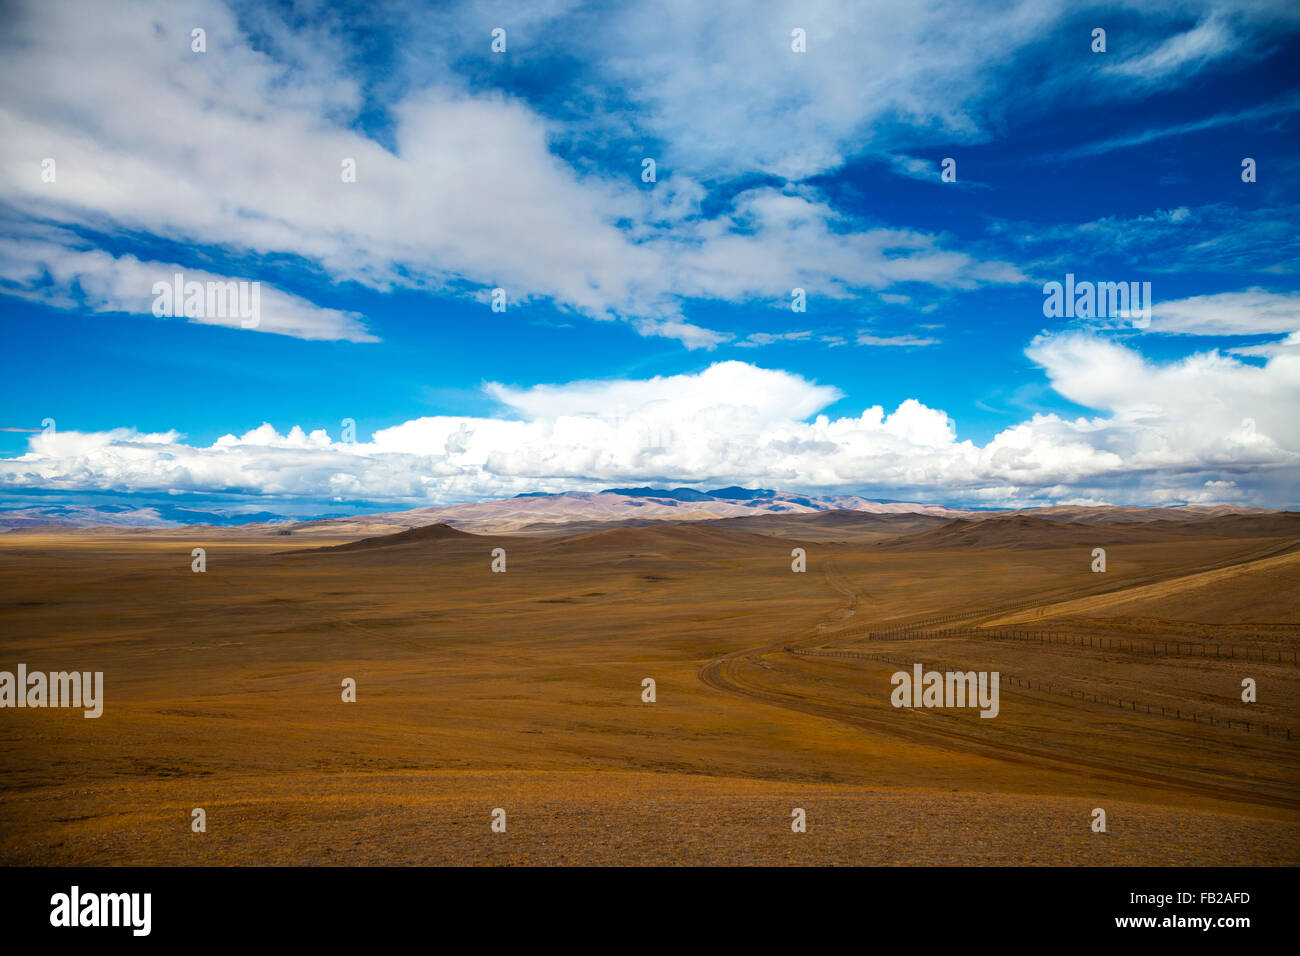 The road crosses the steppe, mountains, blue sky with clouds. Chuya Steppe  in the Siberian Altai Mountains, Russia Stock Photo